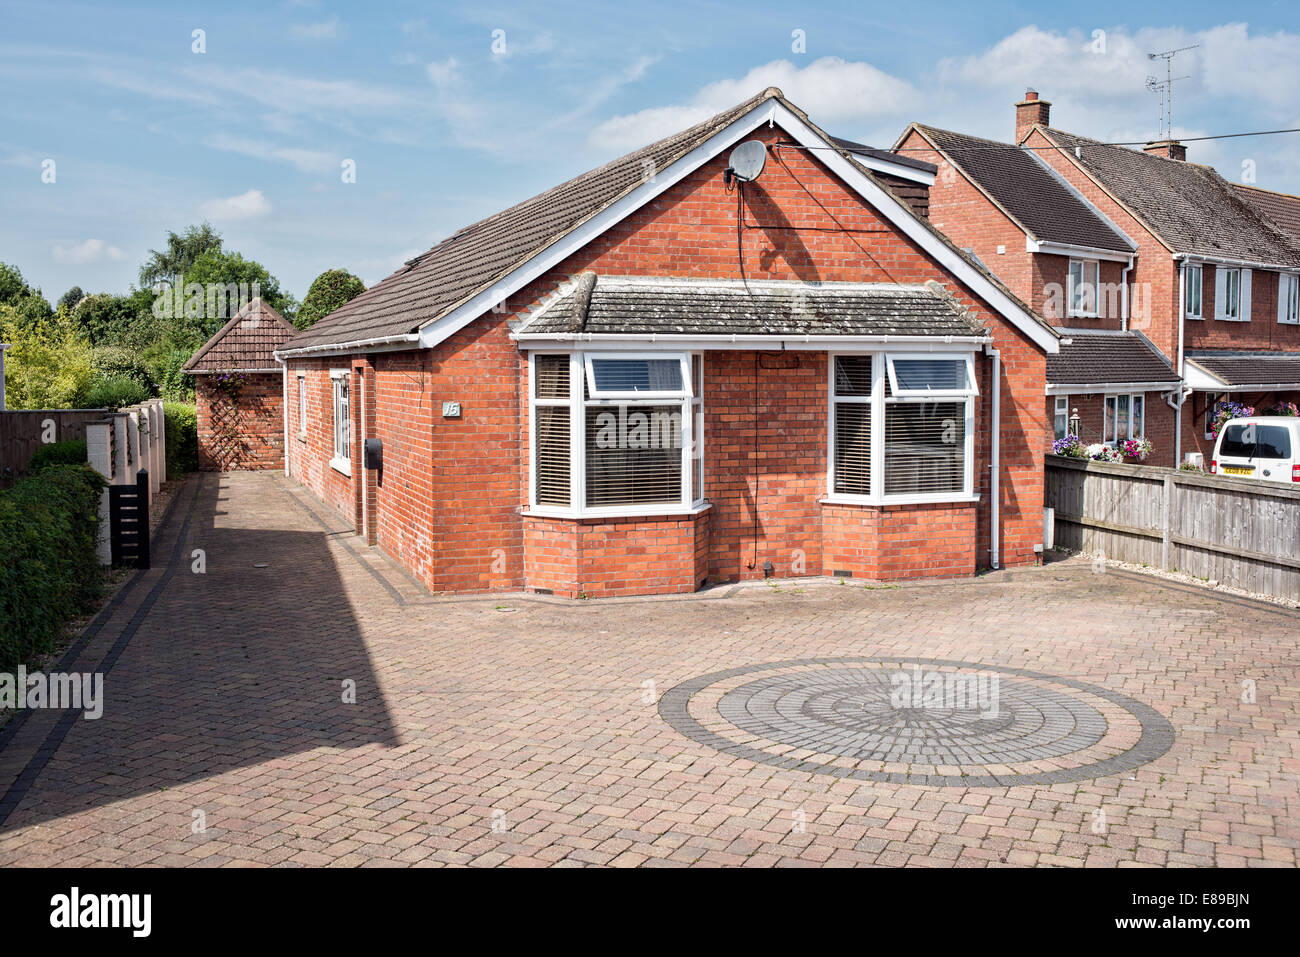 A renovated & extended, double glazed, red brick bungalow with block paved forecourt  on a sunny day, Wiltshire, UK Stock Photo